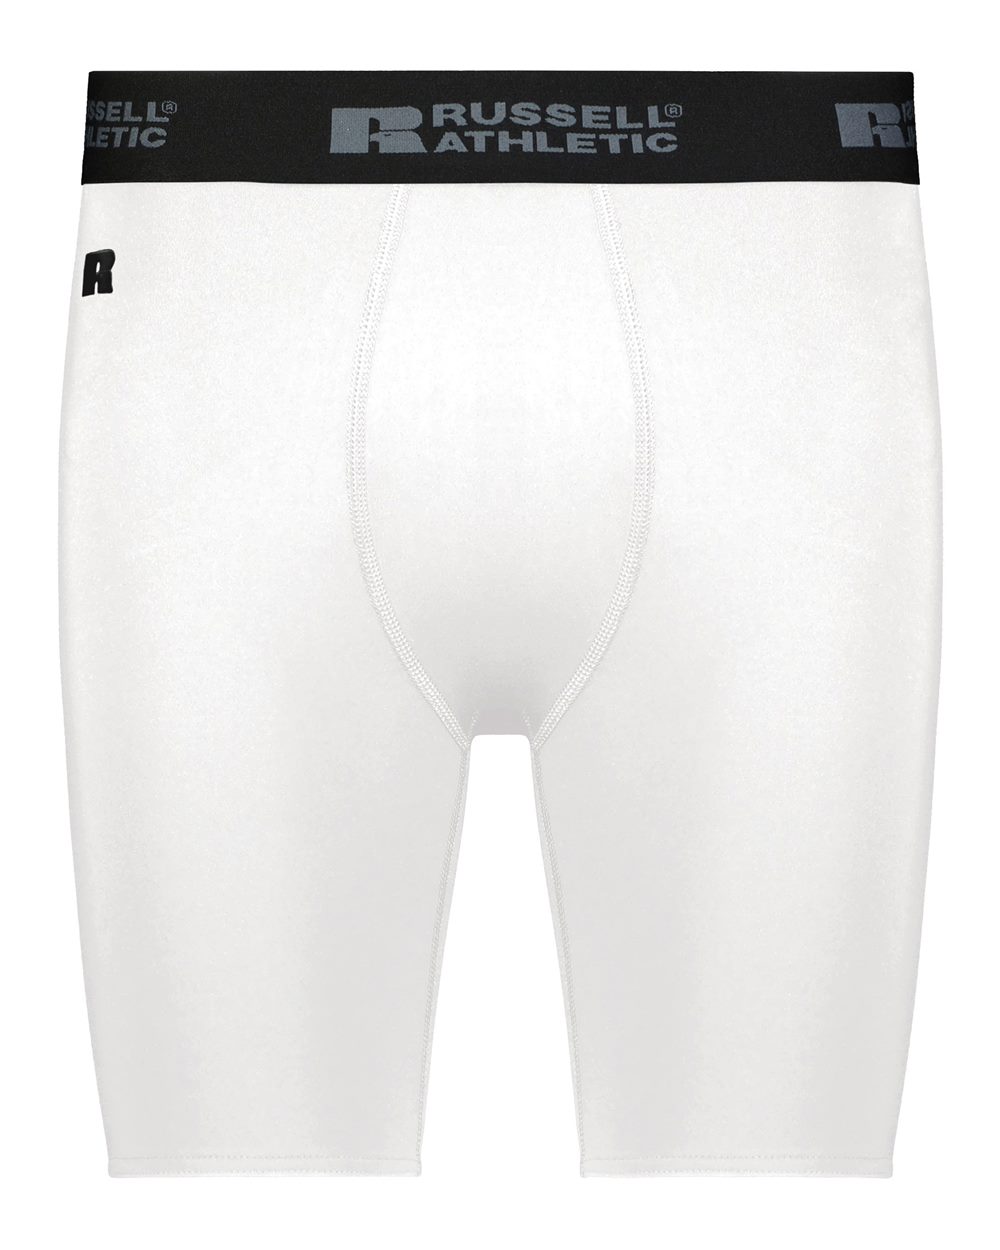 Russell Athletic&#xAE; - CoolCore Compression Shorts | 84/16 polyester/spandex elastane Xtreme compression cloth - R24CPM | Unleash Your Style with Our Trendy Athletic shorts